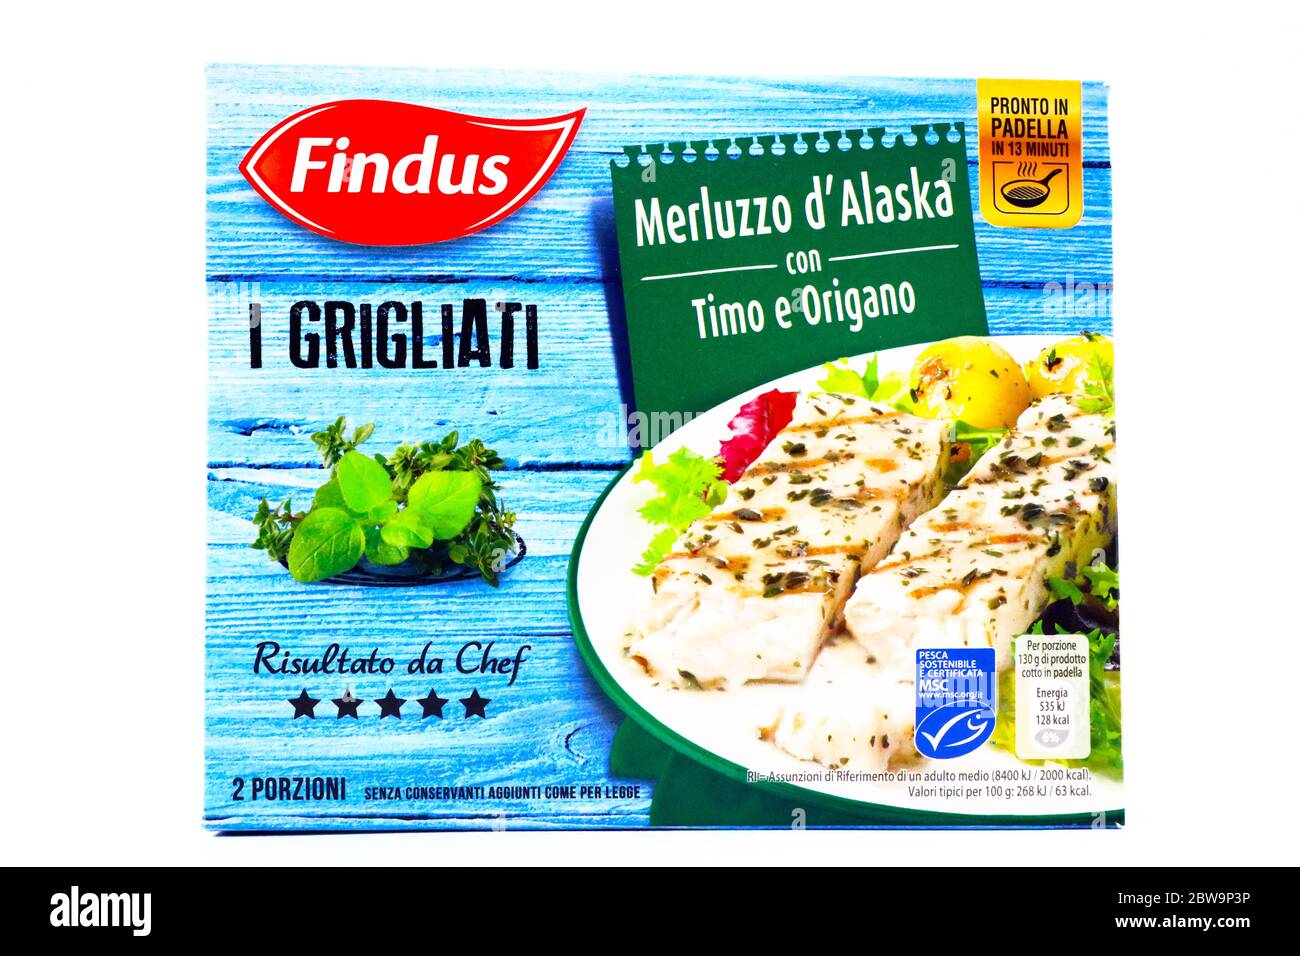 Findus Alaskan cod. Findus is a frozen food brand of Nomad Foods Group  Stock Photo - Alamy